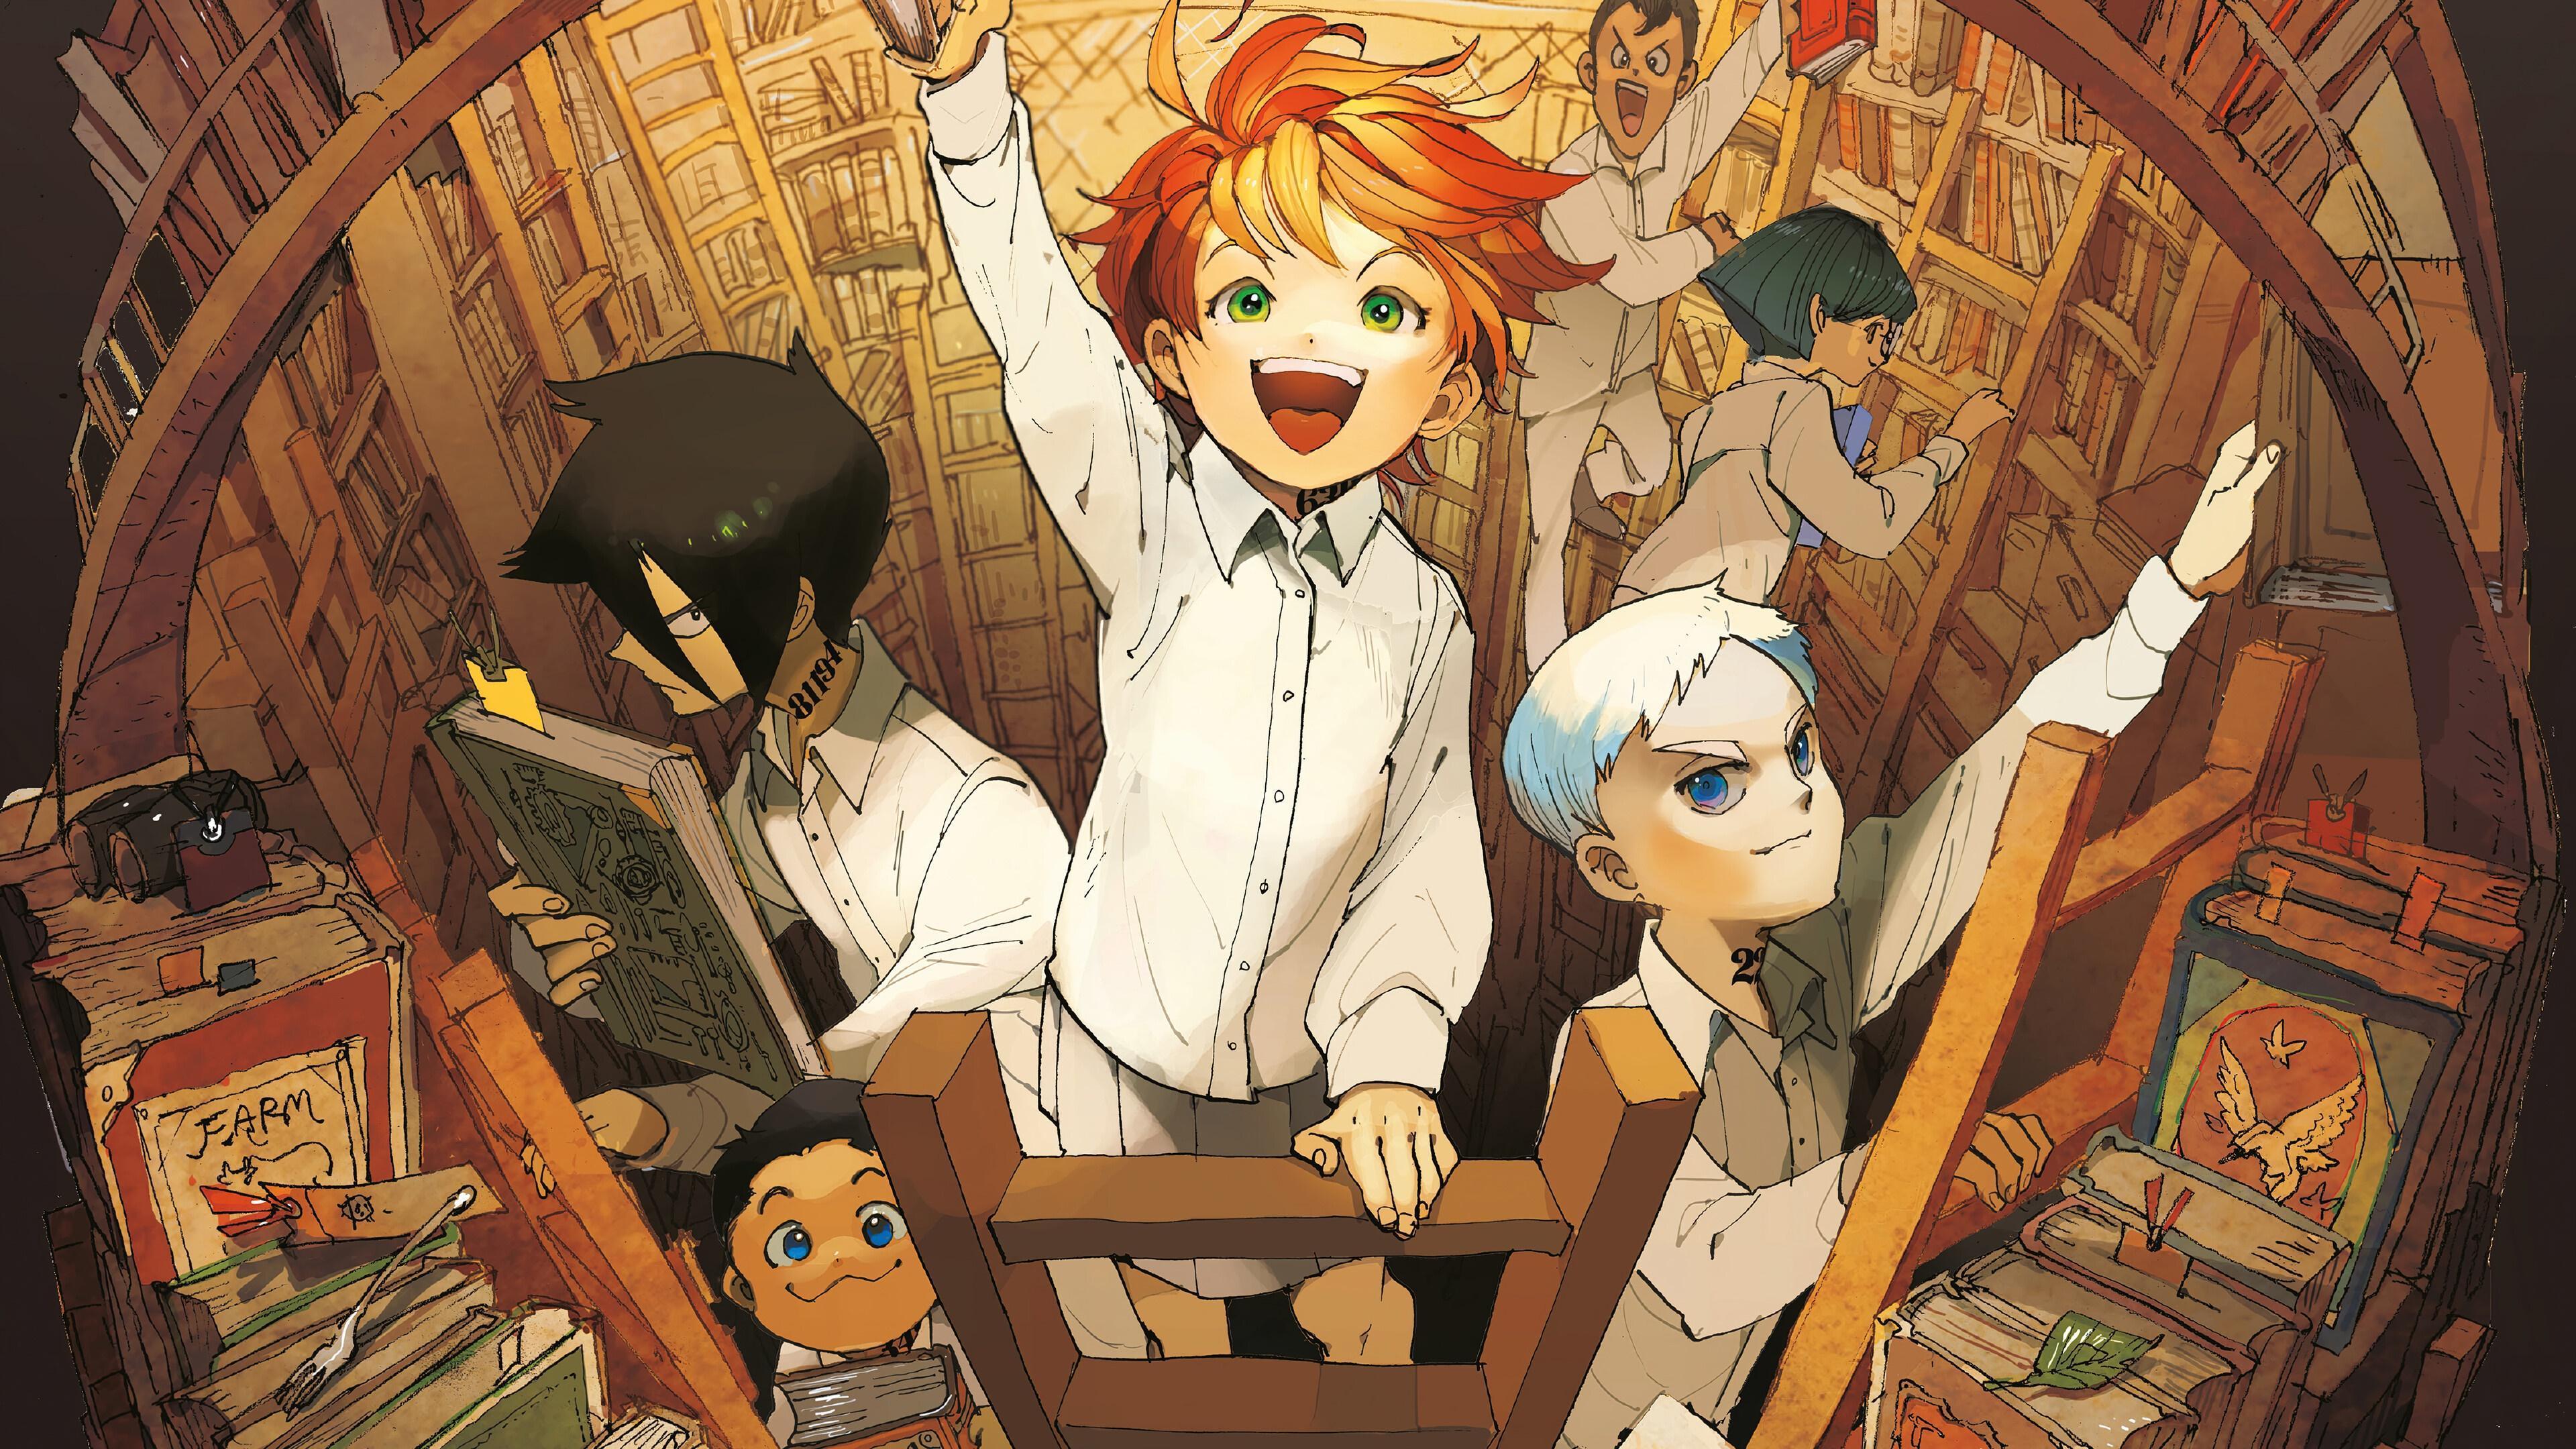 HD wallpaper, Norman, Ray, 4K, Wallpaper, Hd, The Promised Neverland, Emma